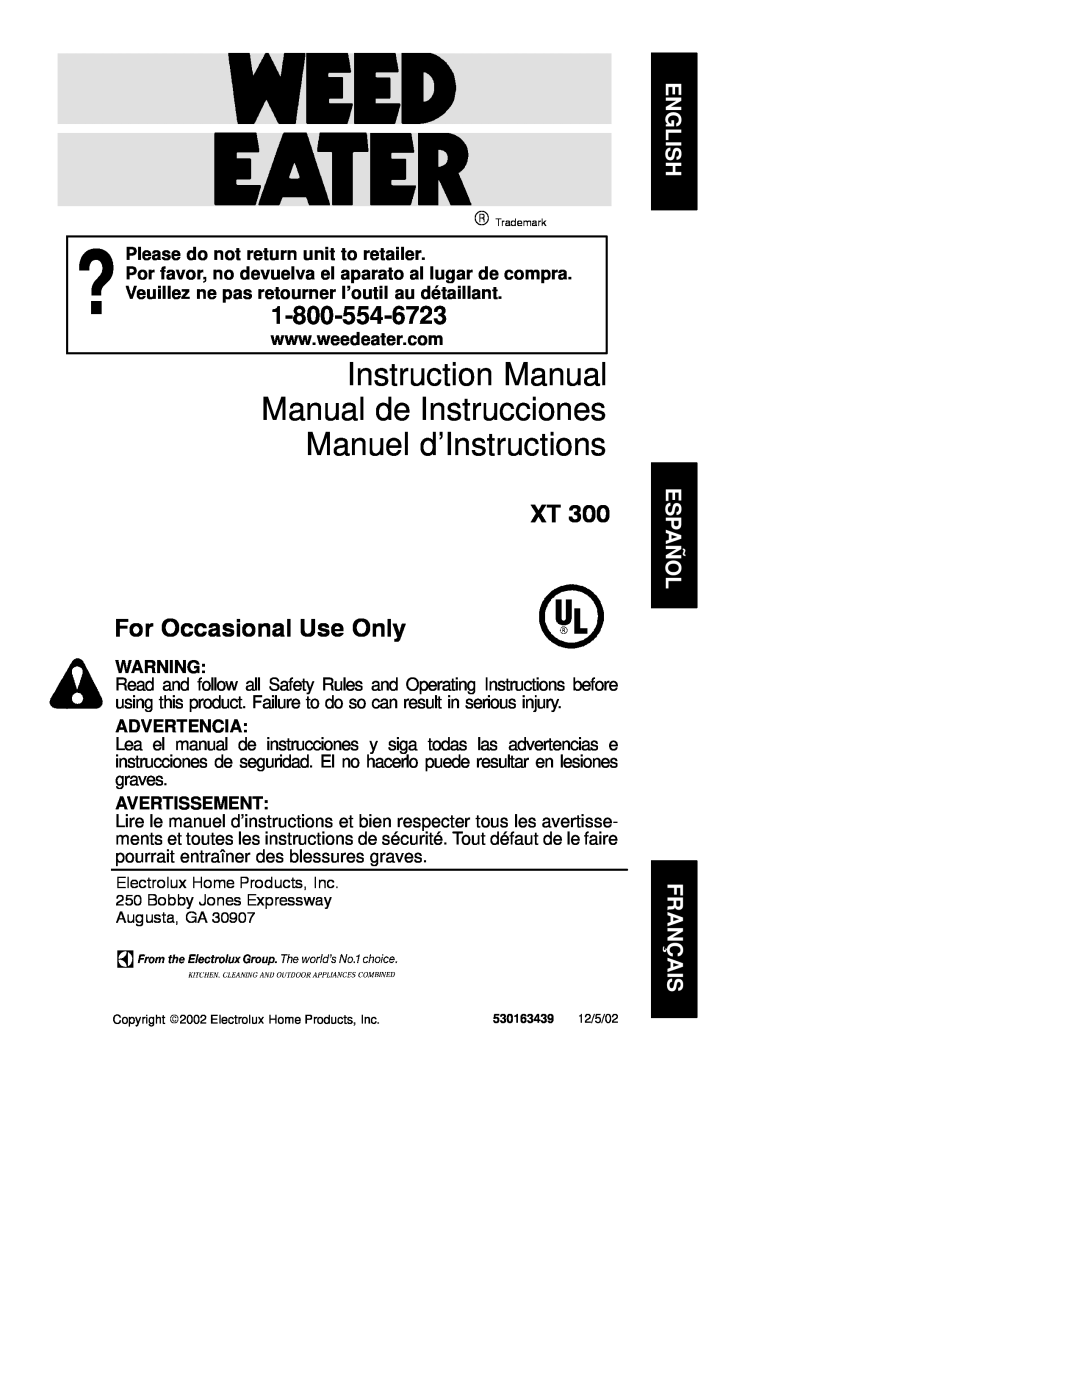 Weed Eater 530163439 instruction manual Please do not return unit to retailer, Advertencia, Avertissement 